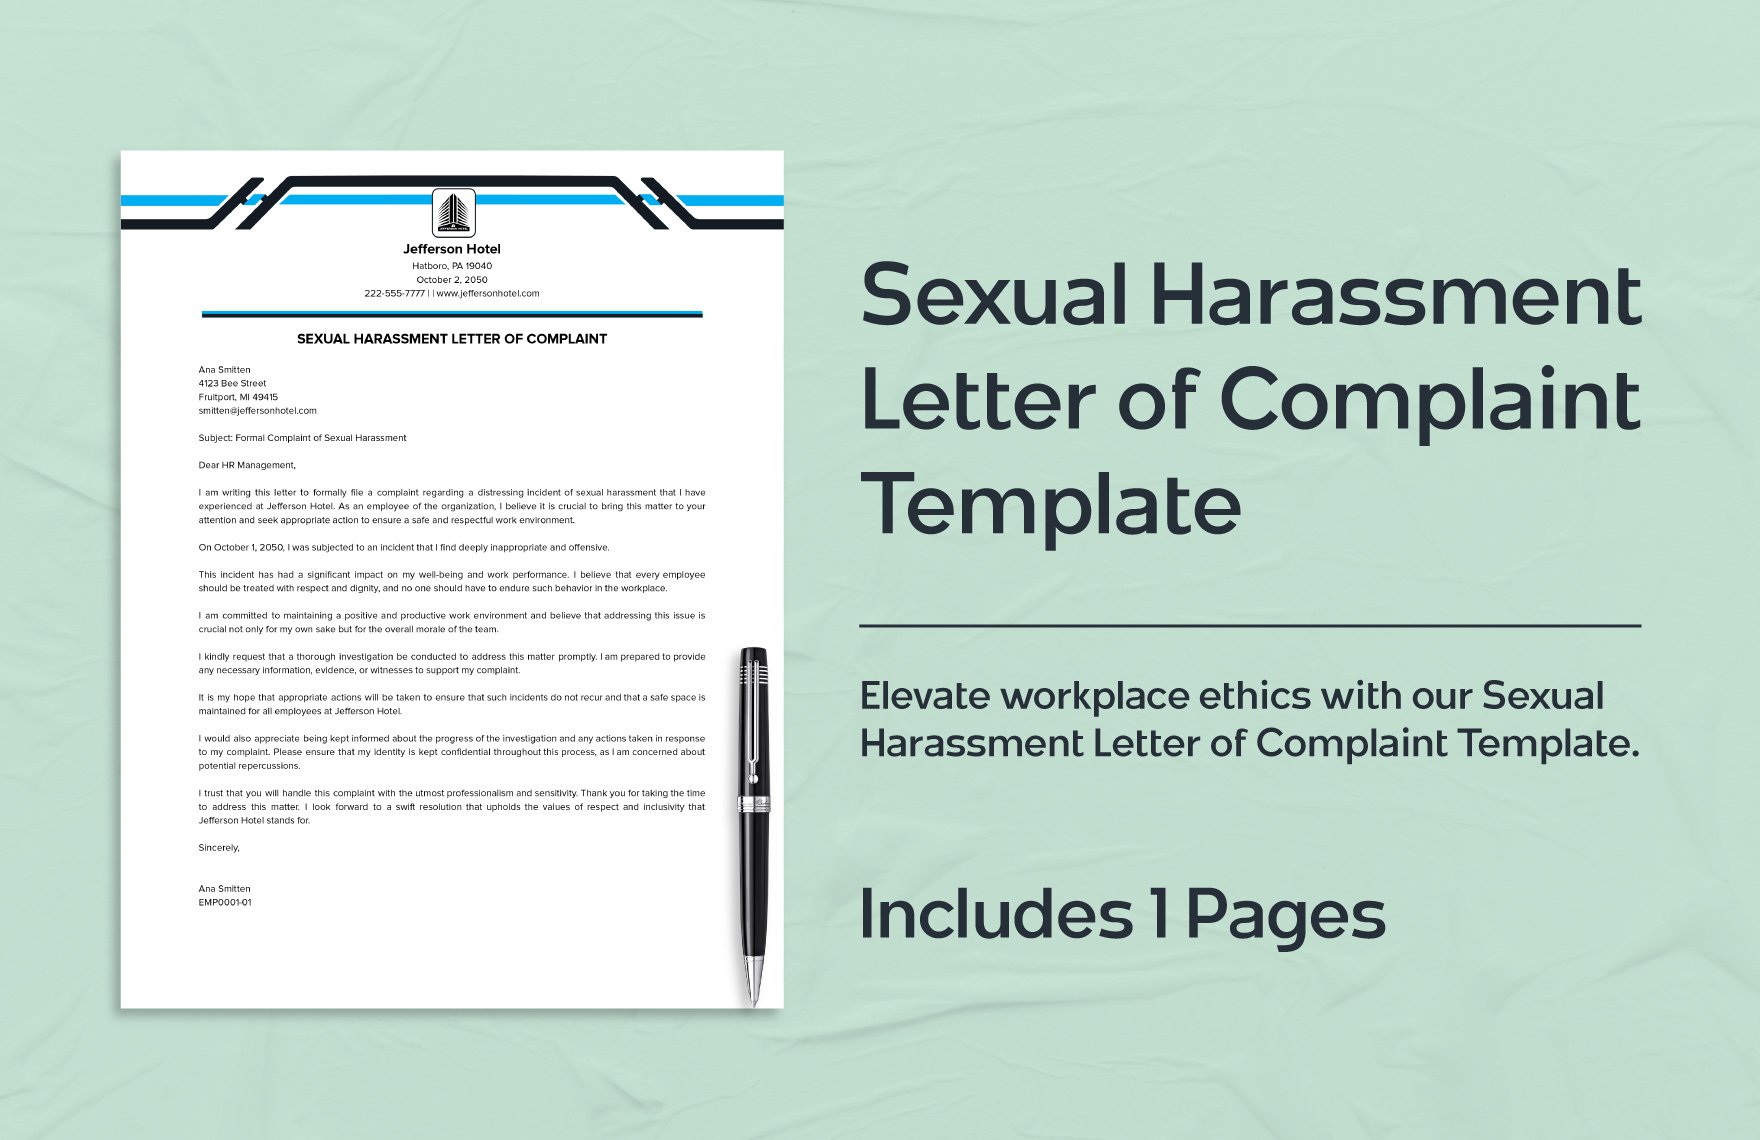 Sexual Harassment Letter of Complaint Template